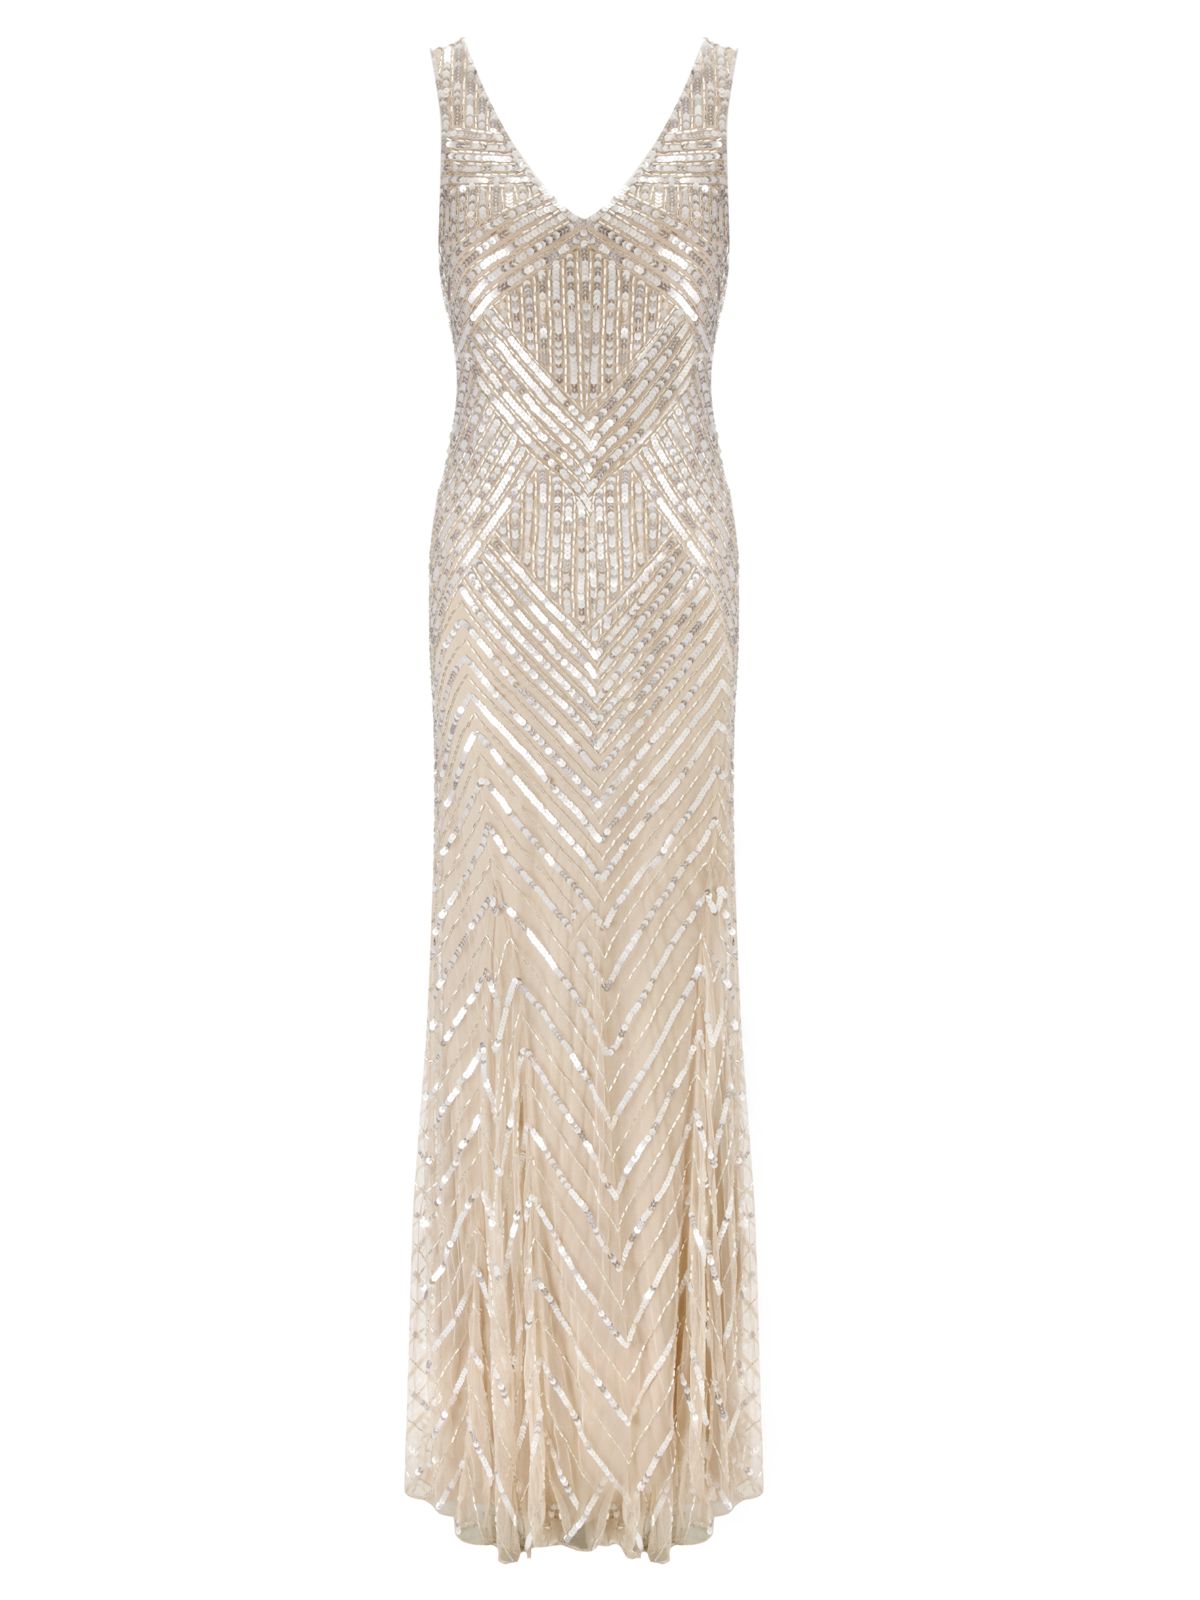 John Lewis Sidney Sequined Dress, Champagne at John Lewis & Partners